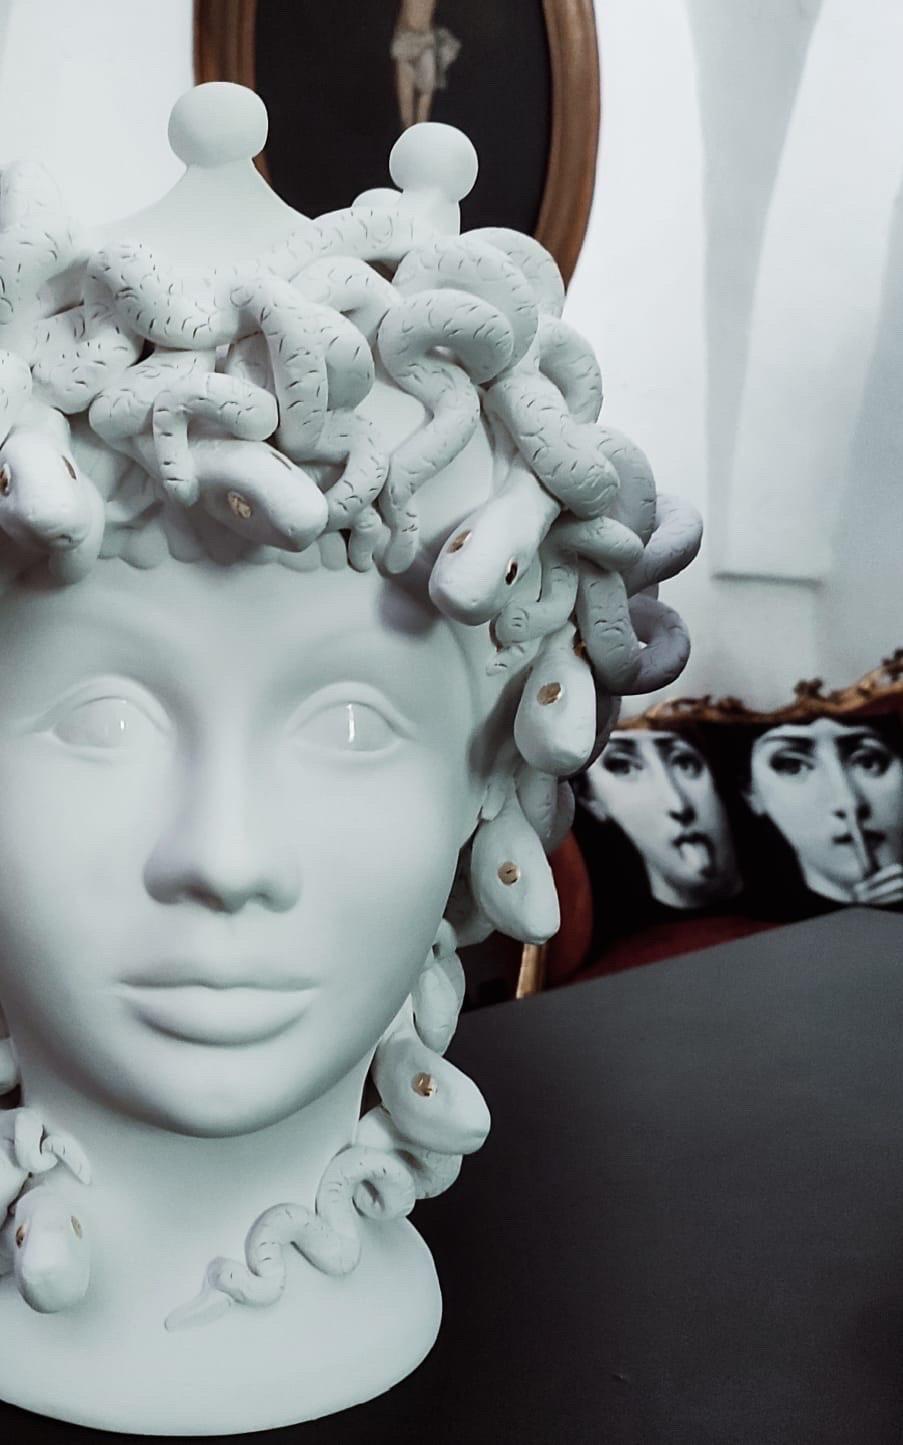 In Greek mythology, Medusa, was one of the three monstrous Gorgons, generally described as winged human females with living venomous snakes in place of hair. 
Those who gazed into her eyes would turn to stone. 
Medusa was beheaded by the Greek